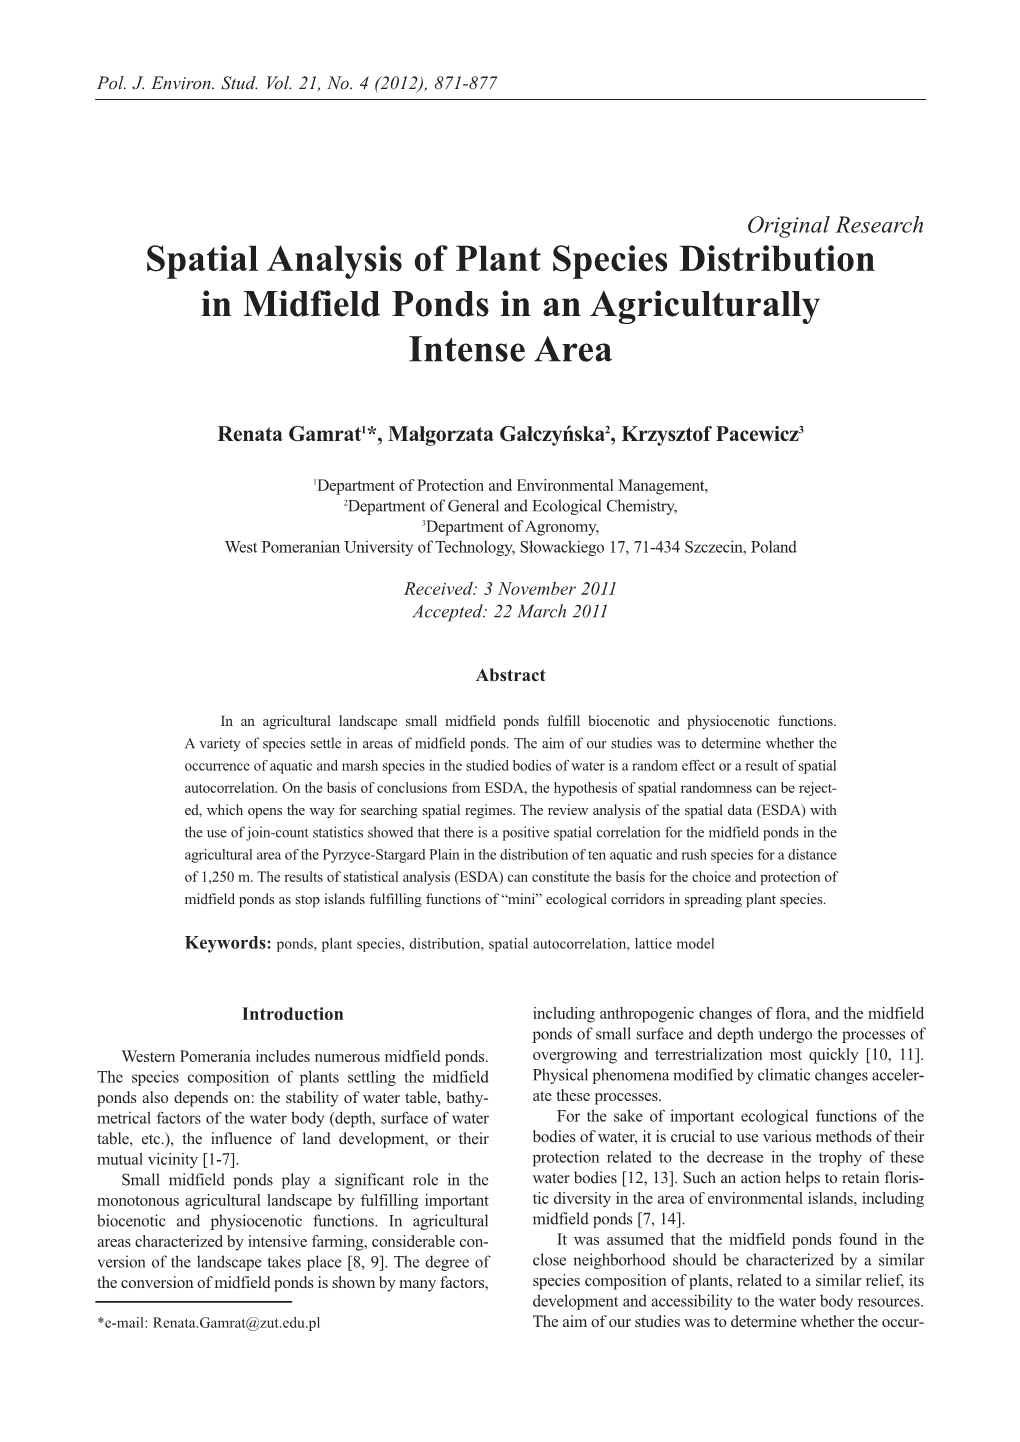 Spatial Analysis of Plant Species Distribution in Midfield Ponds in an Agriculturally Intense Area